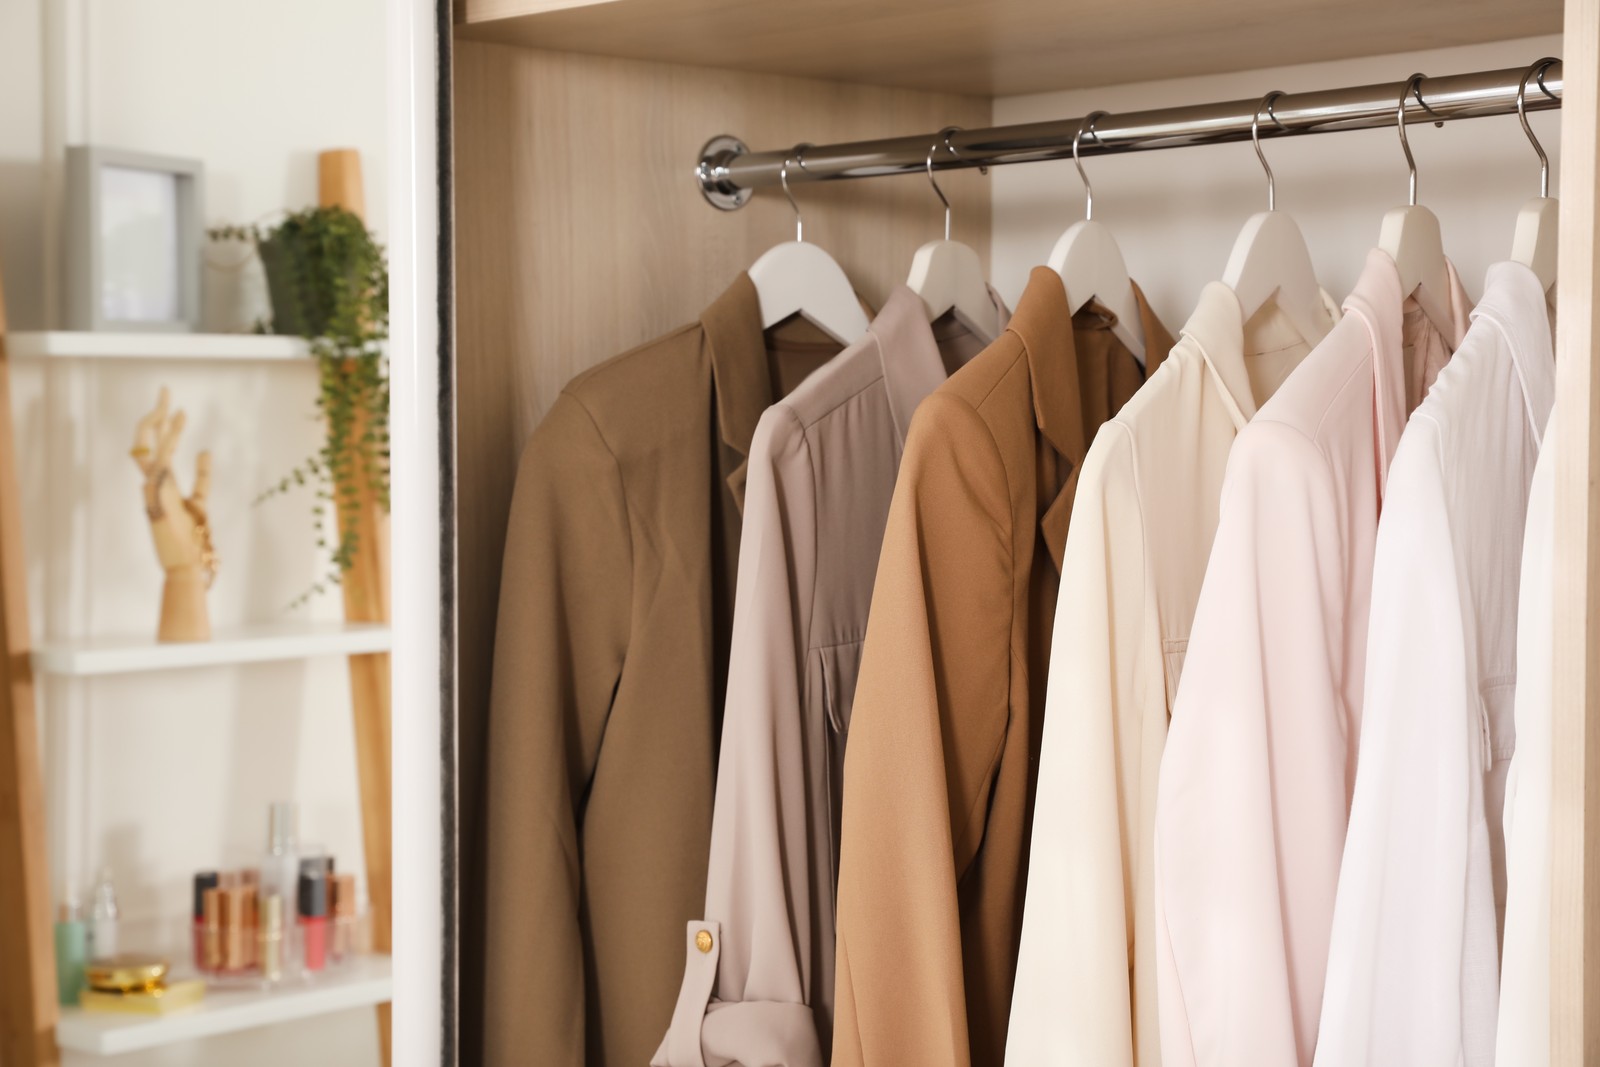 Photo of new stylish clothes hanging in wardrobe, closeup view